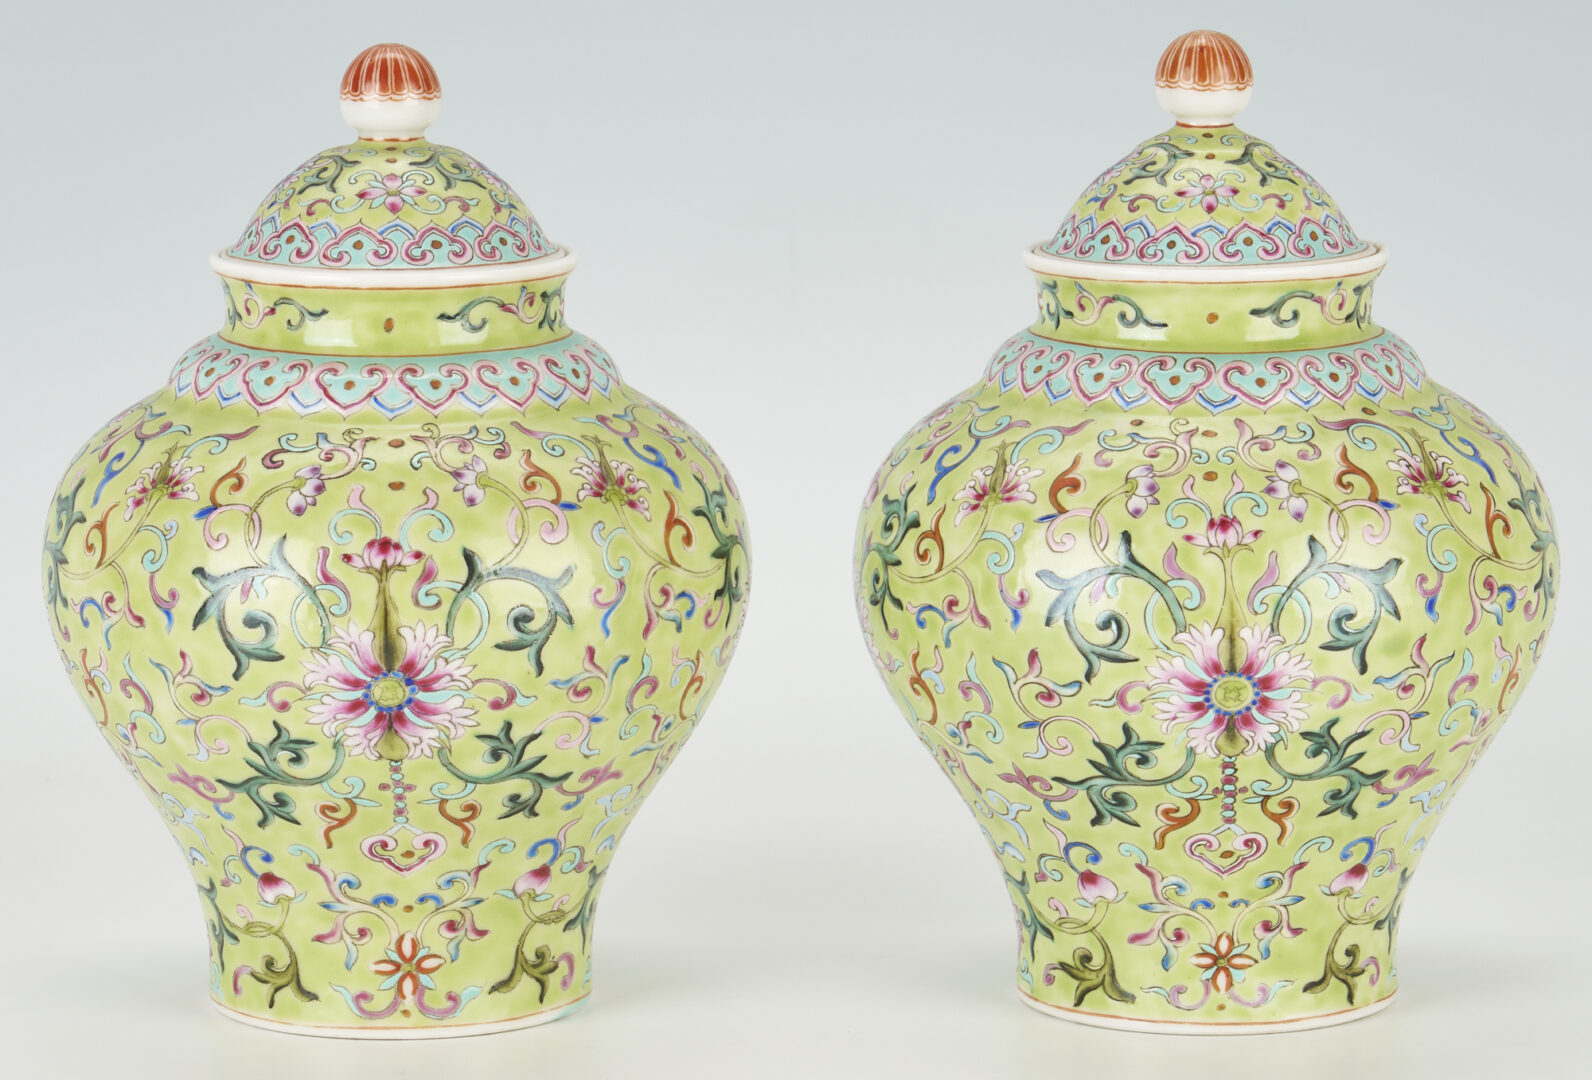 Lot 9: Pair of Chinese Lime Green Ground Famille Rose Jars